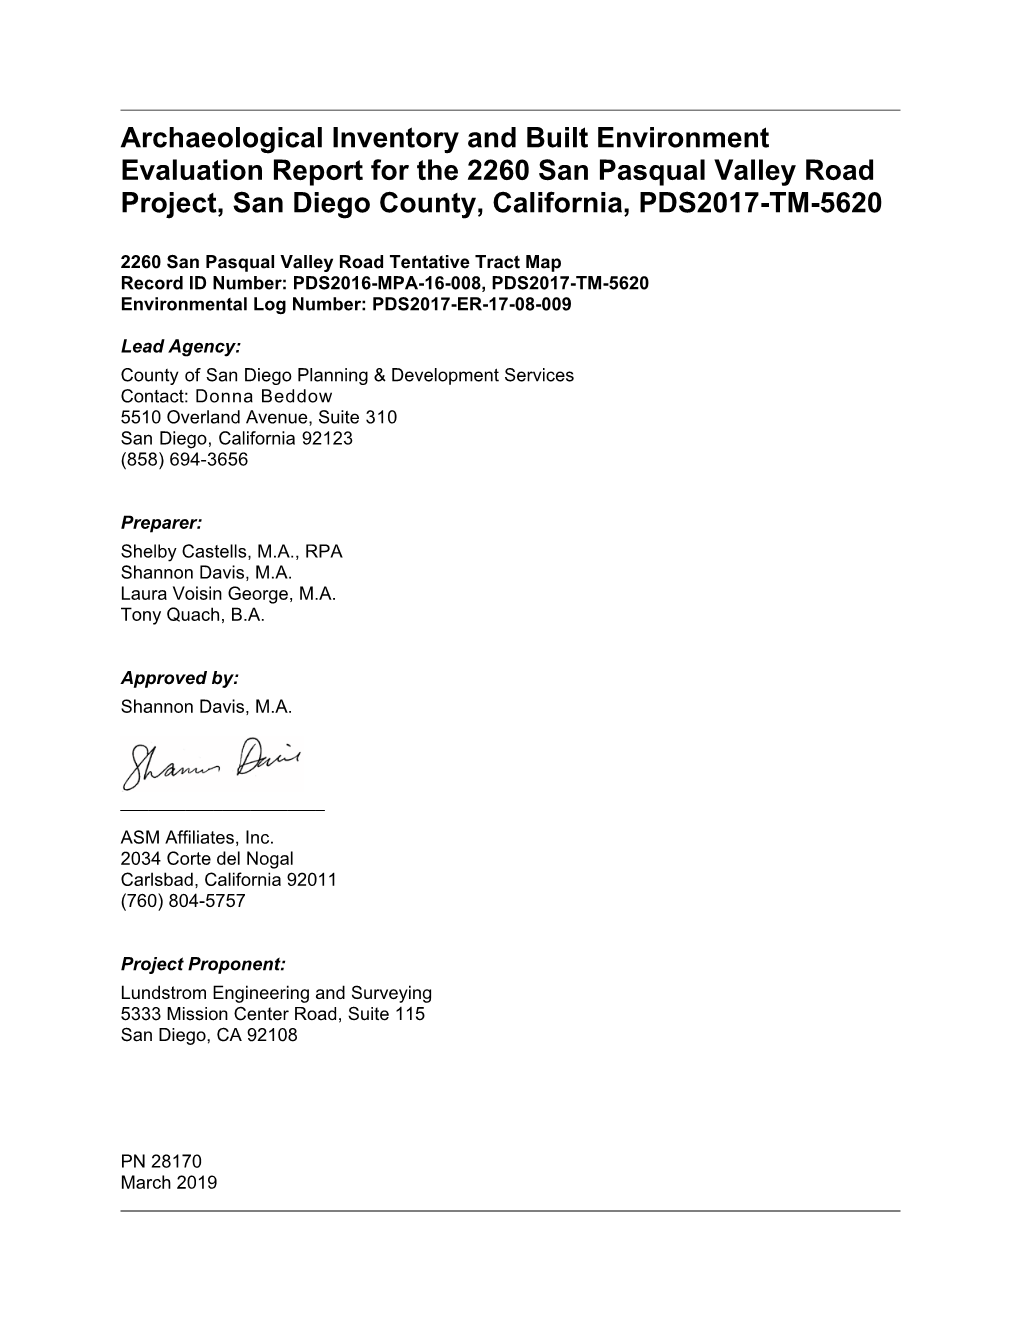 Cultural Resources Reports Addressing the Project Area and 1-Mi